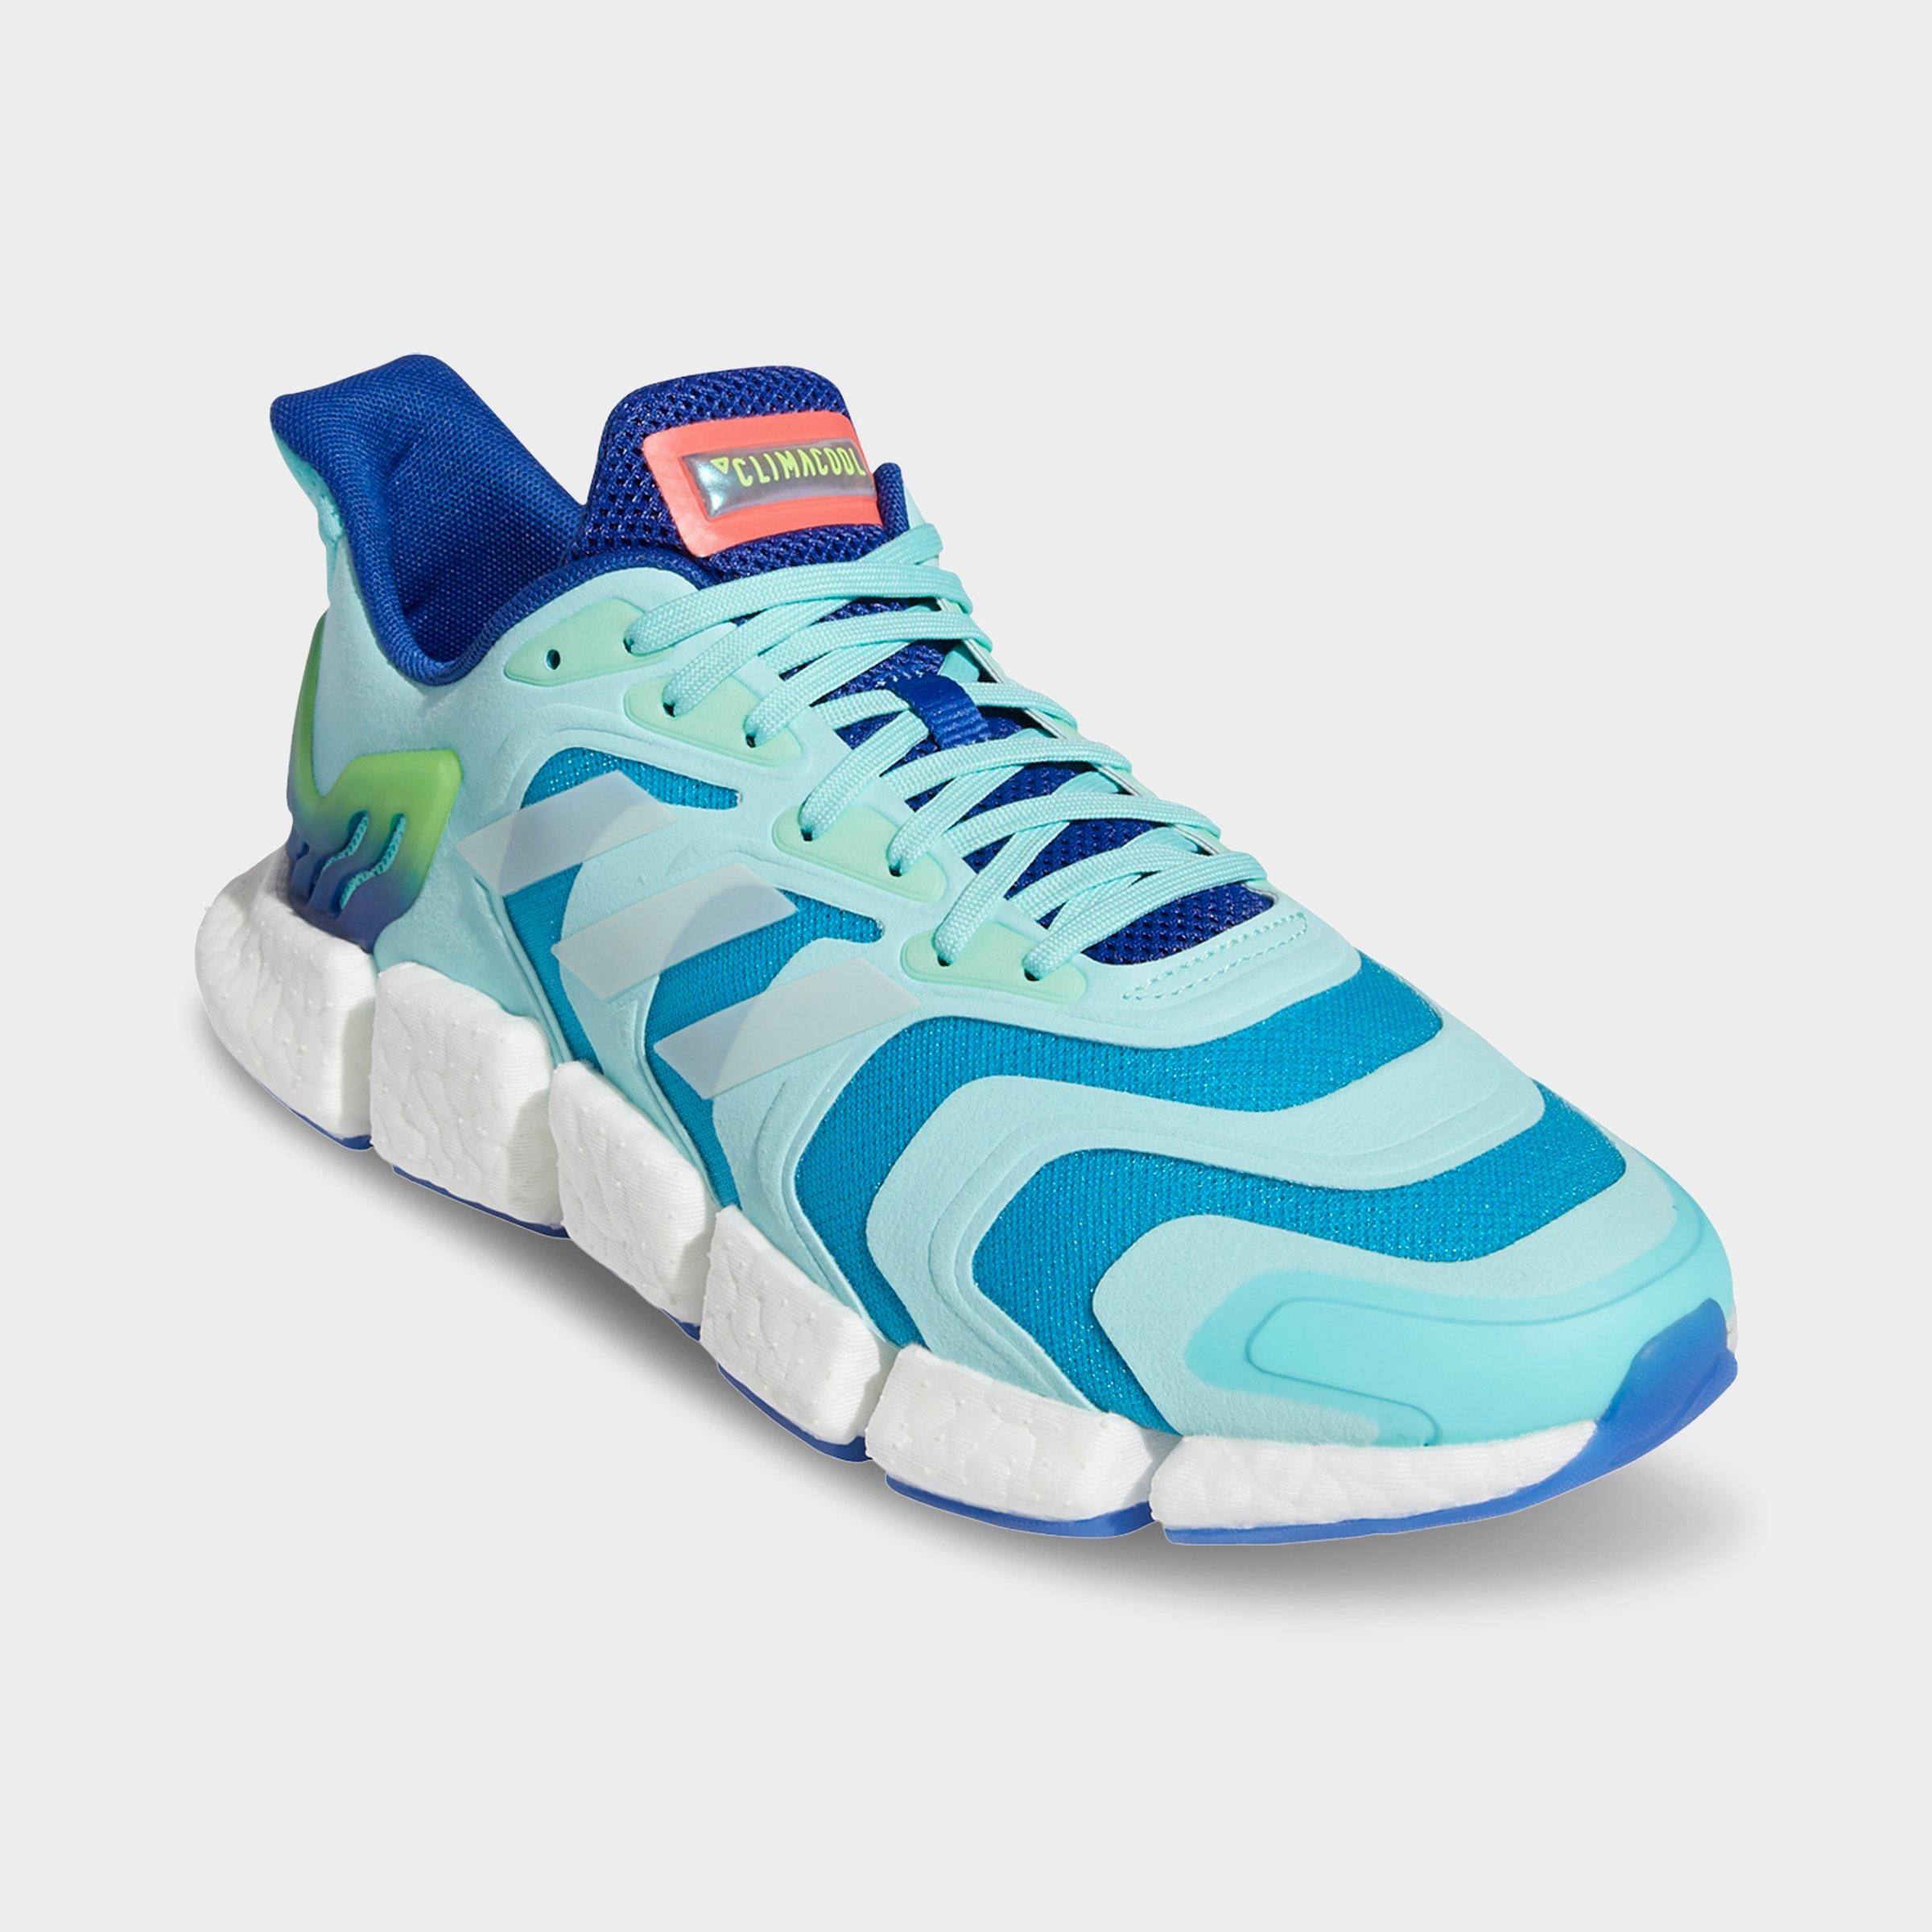 adidas climacool vento running shoes